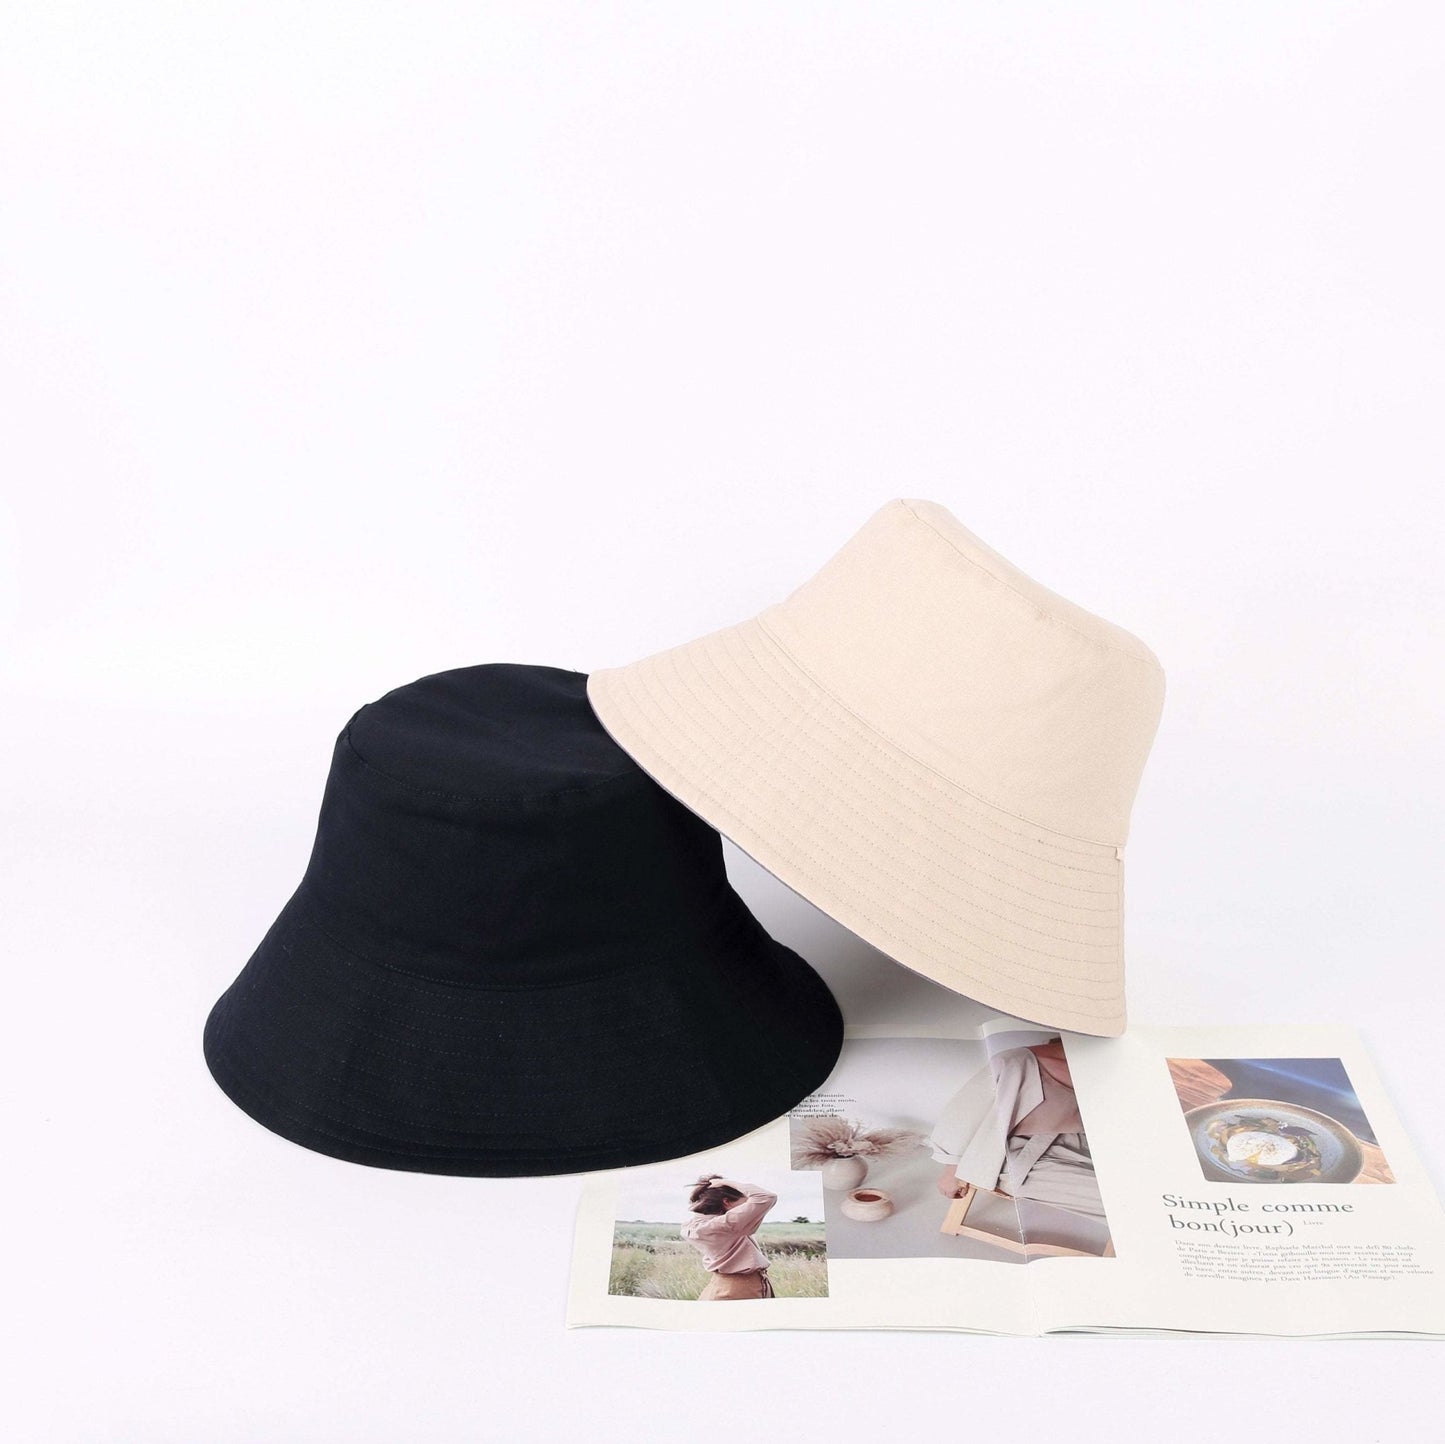 M L XL XXL Reversible Wide Brim Bucket Hat for Women and Girls.